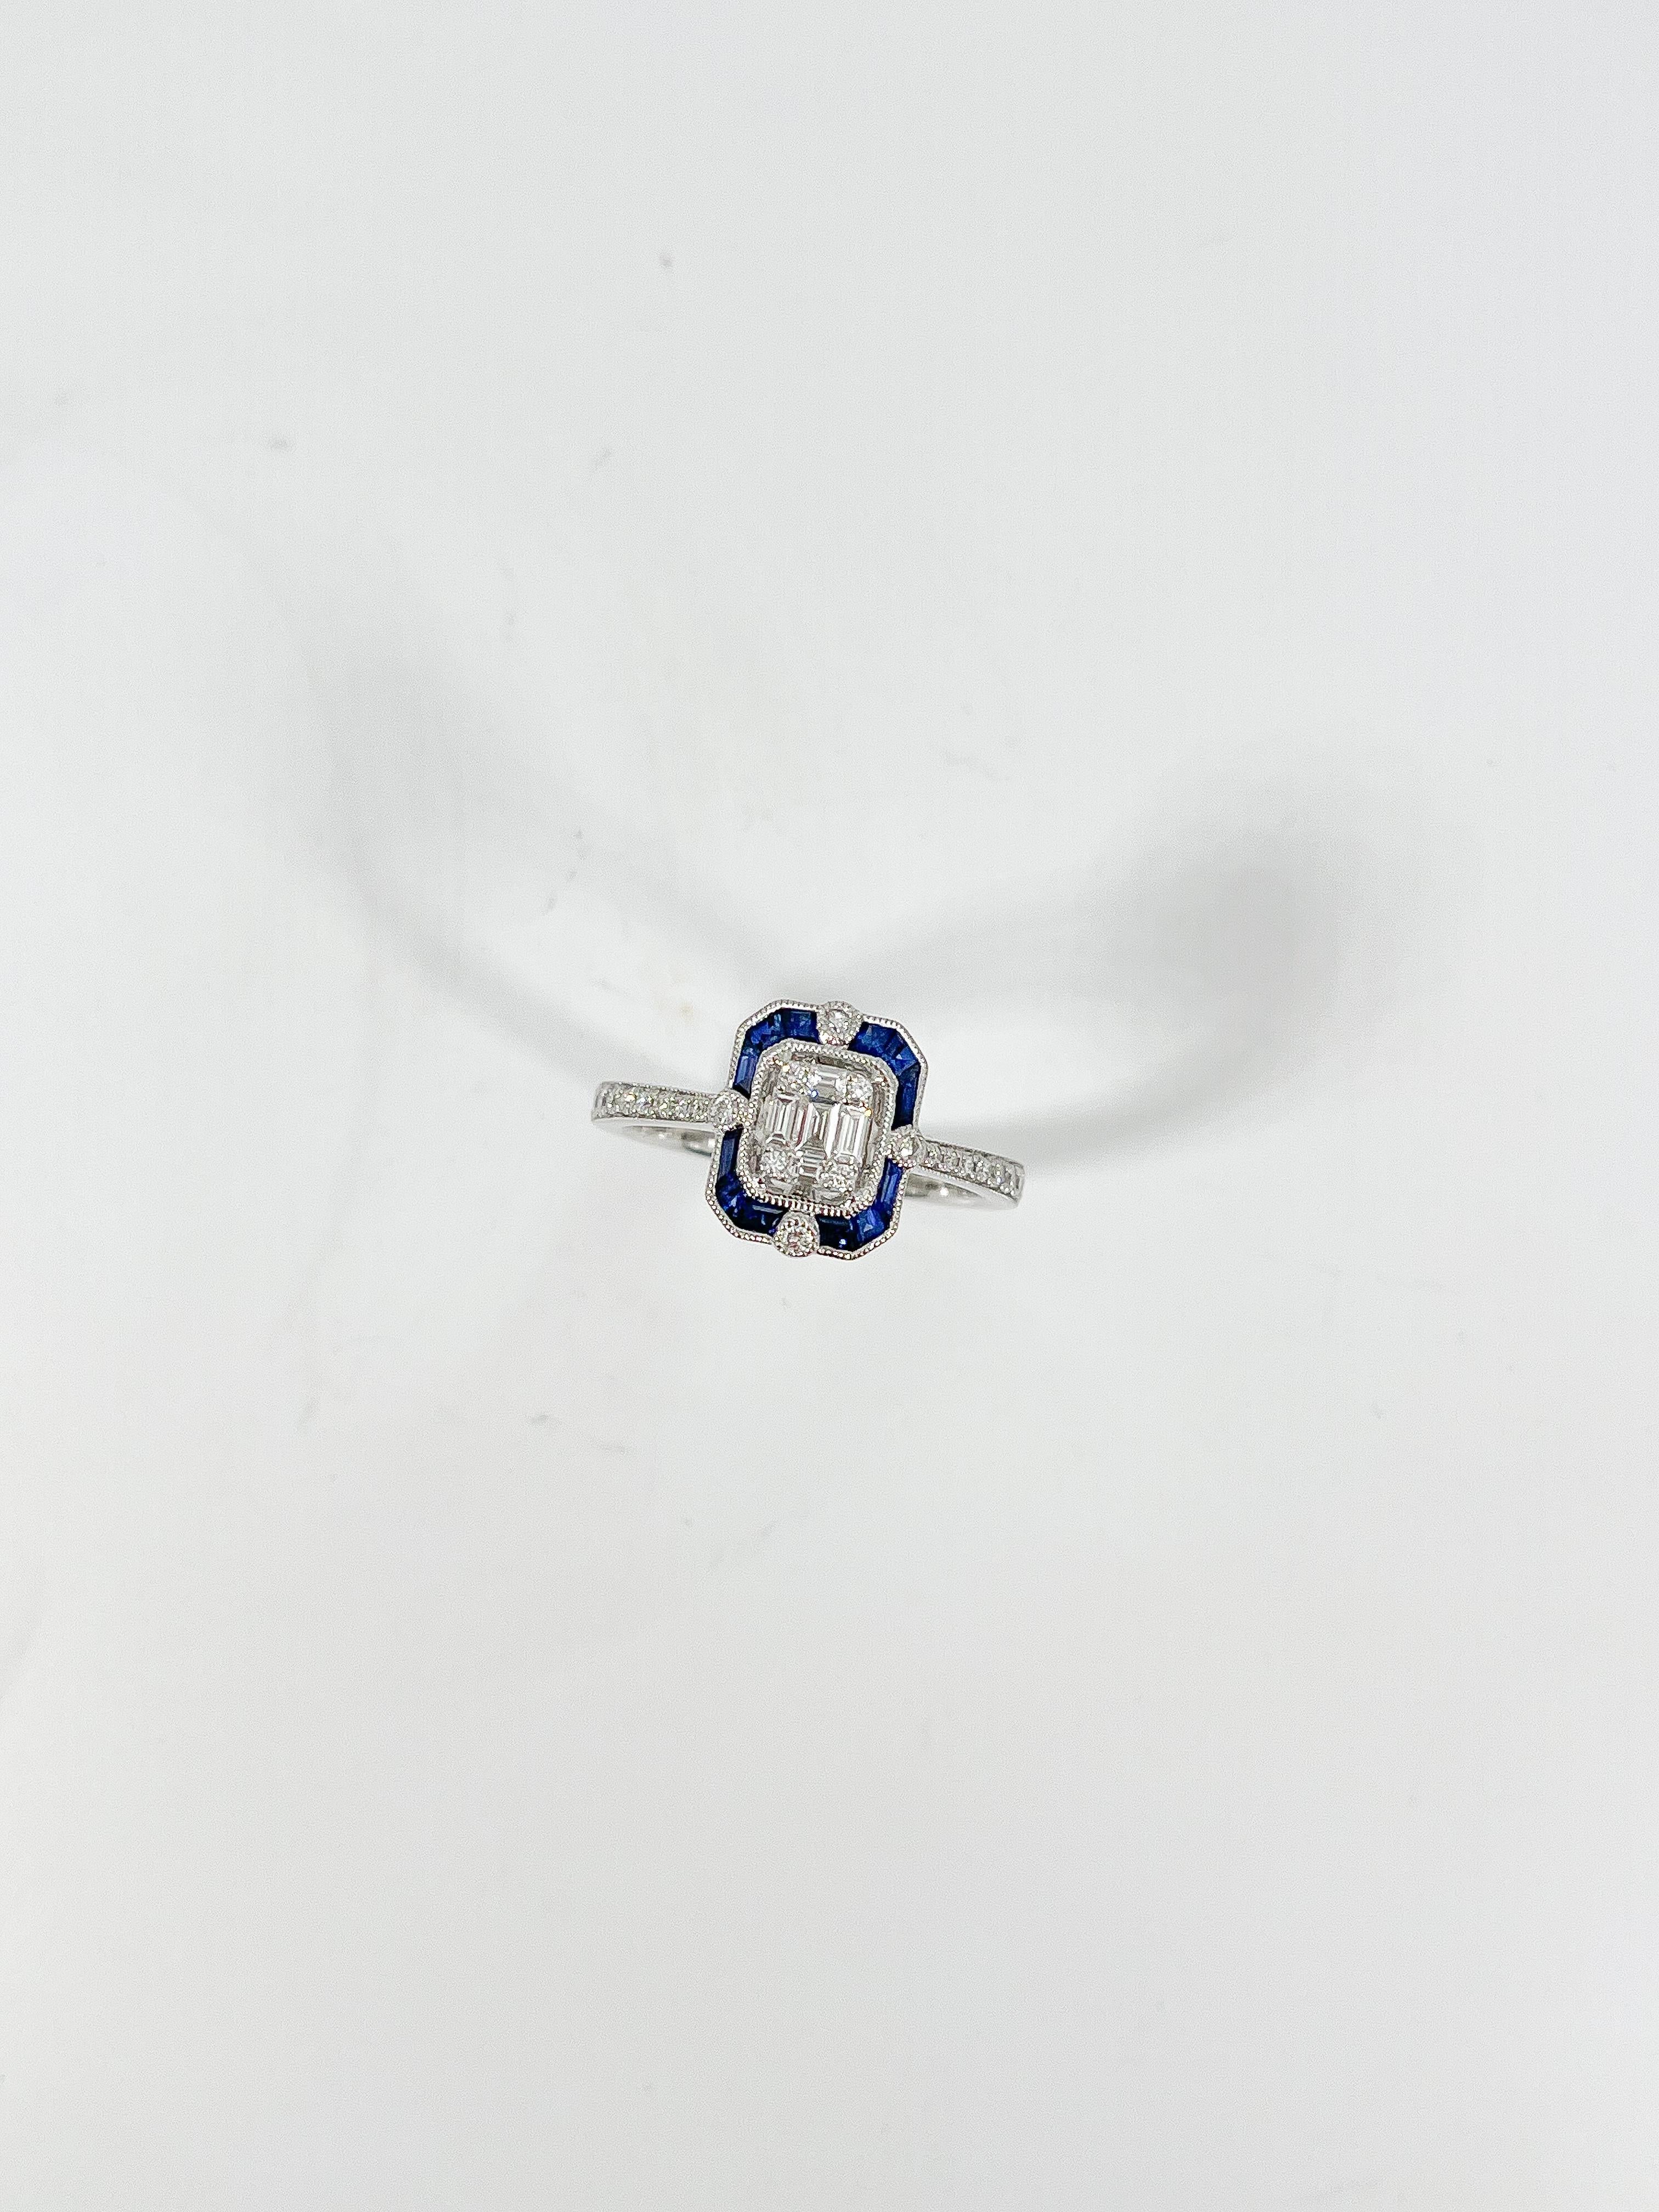 Zeghani 14k white gold .14 CTW Sapphire and .18 CTW diamond ring. The diamonds in this ring are round and baguette, the sapphires are intricate cut, the size of the ring is a 6 1/2, and it has a total weight of 3.6 grams.